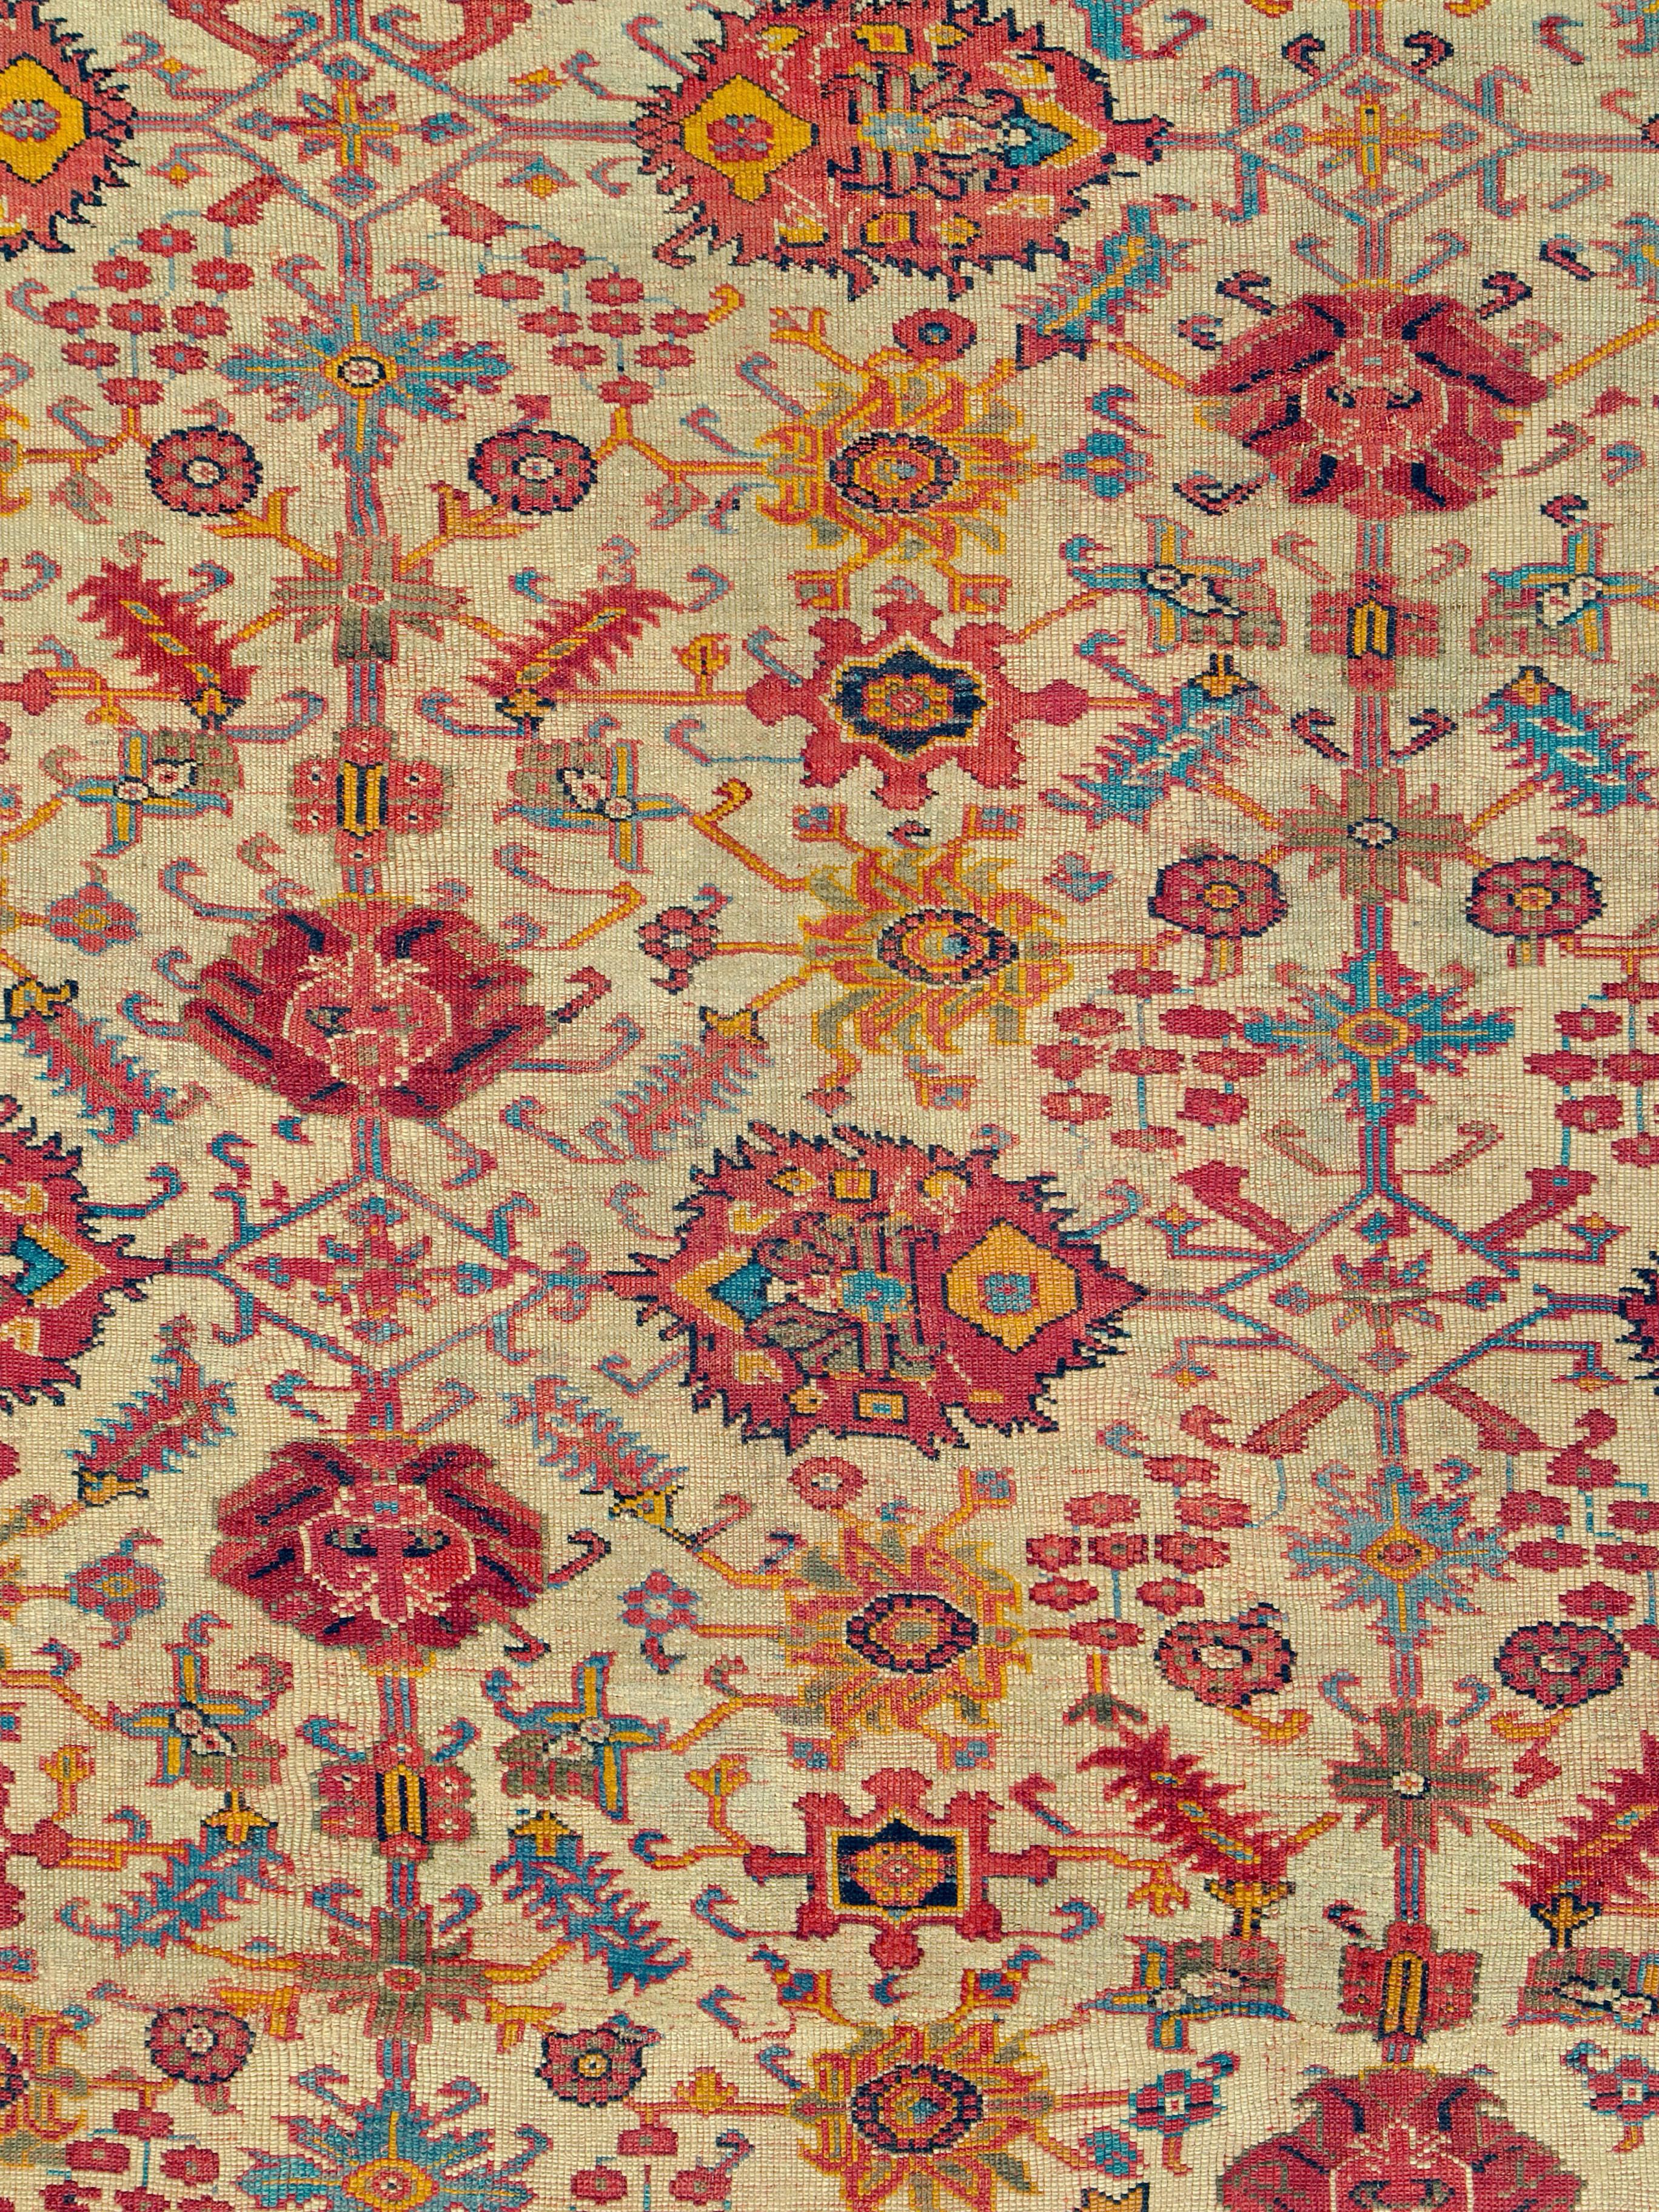 A large antique Turkish Oushak rug handmade during the early 20th century in square size format.

Measures: 15' 2